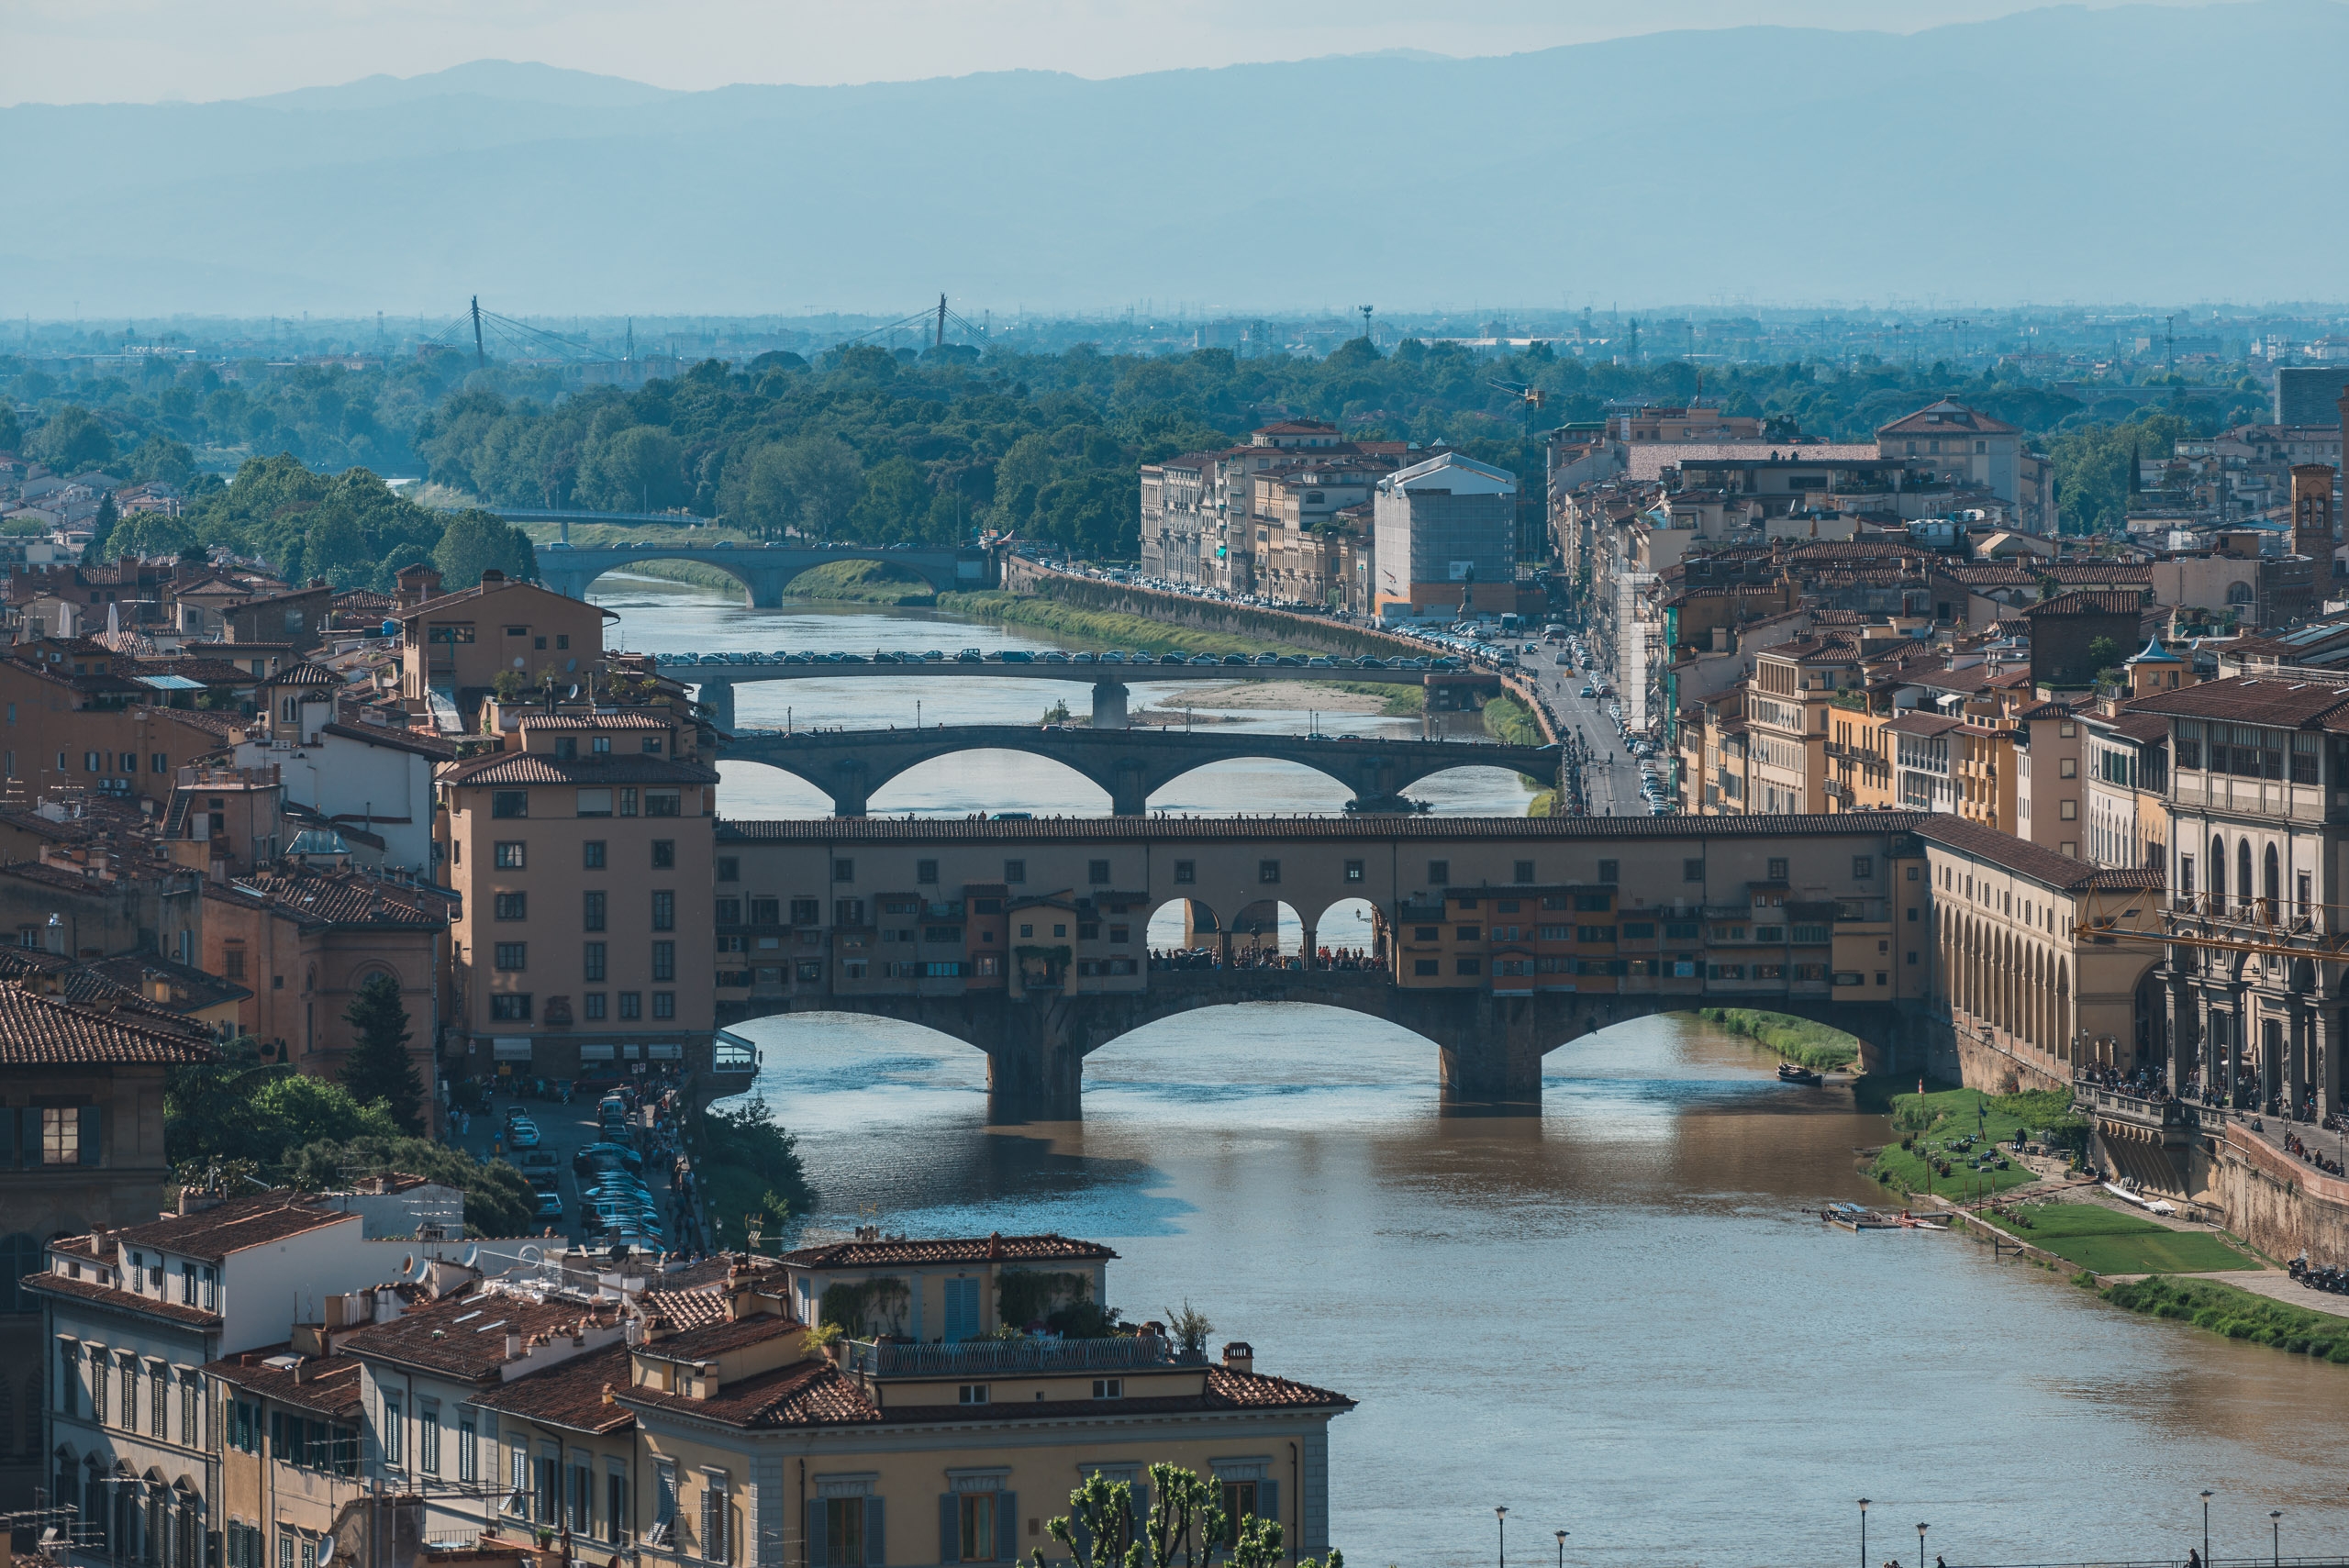 The Ponte Vecchio from Afar